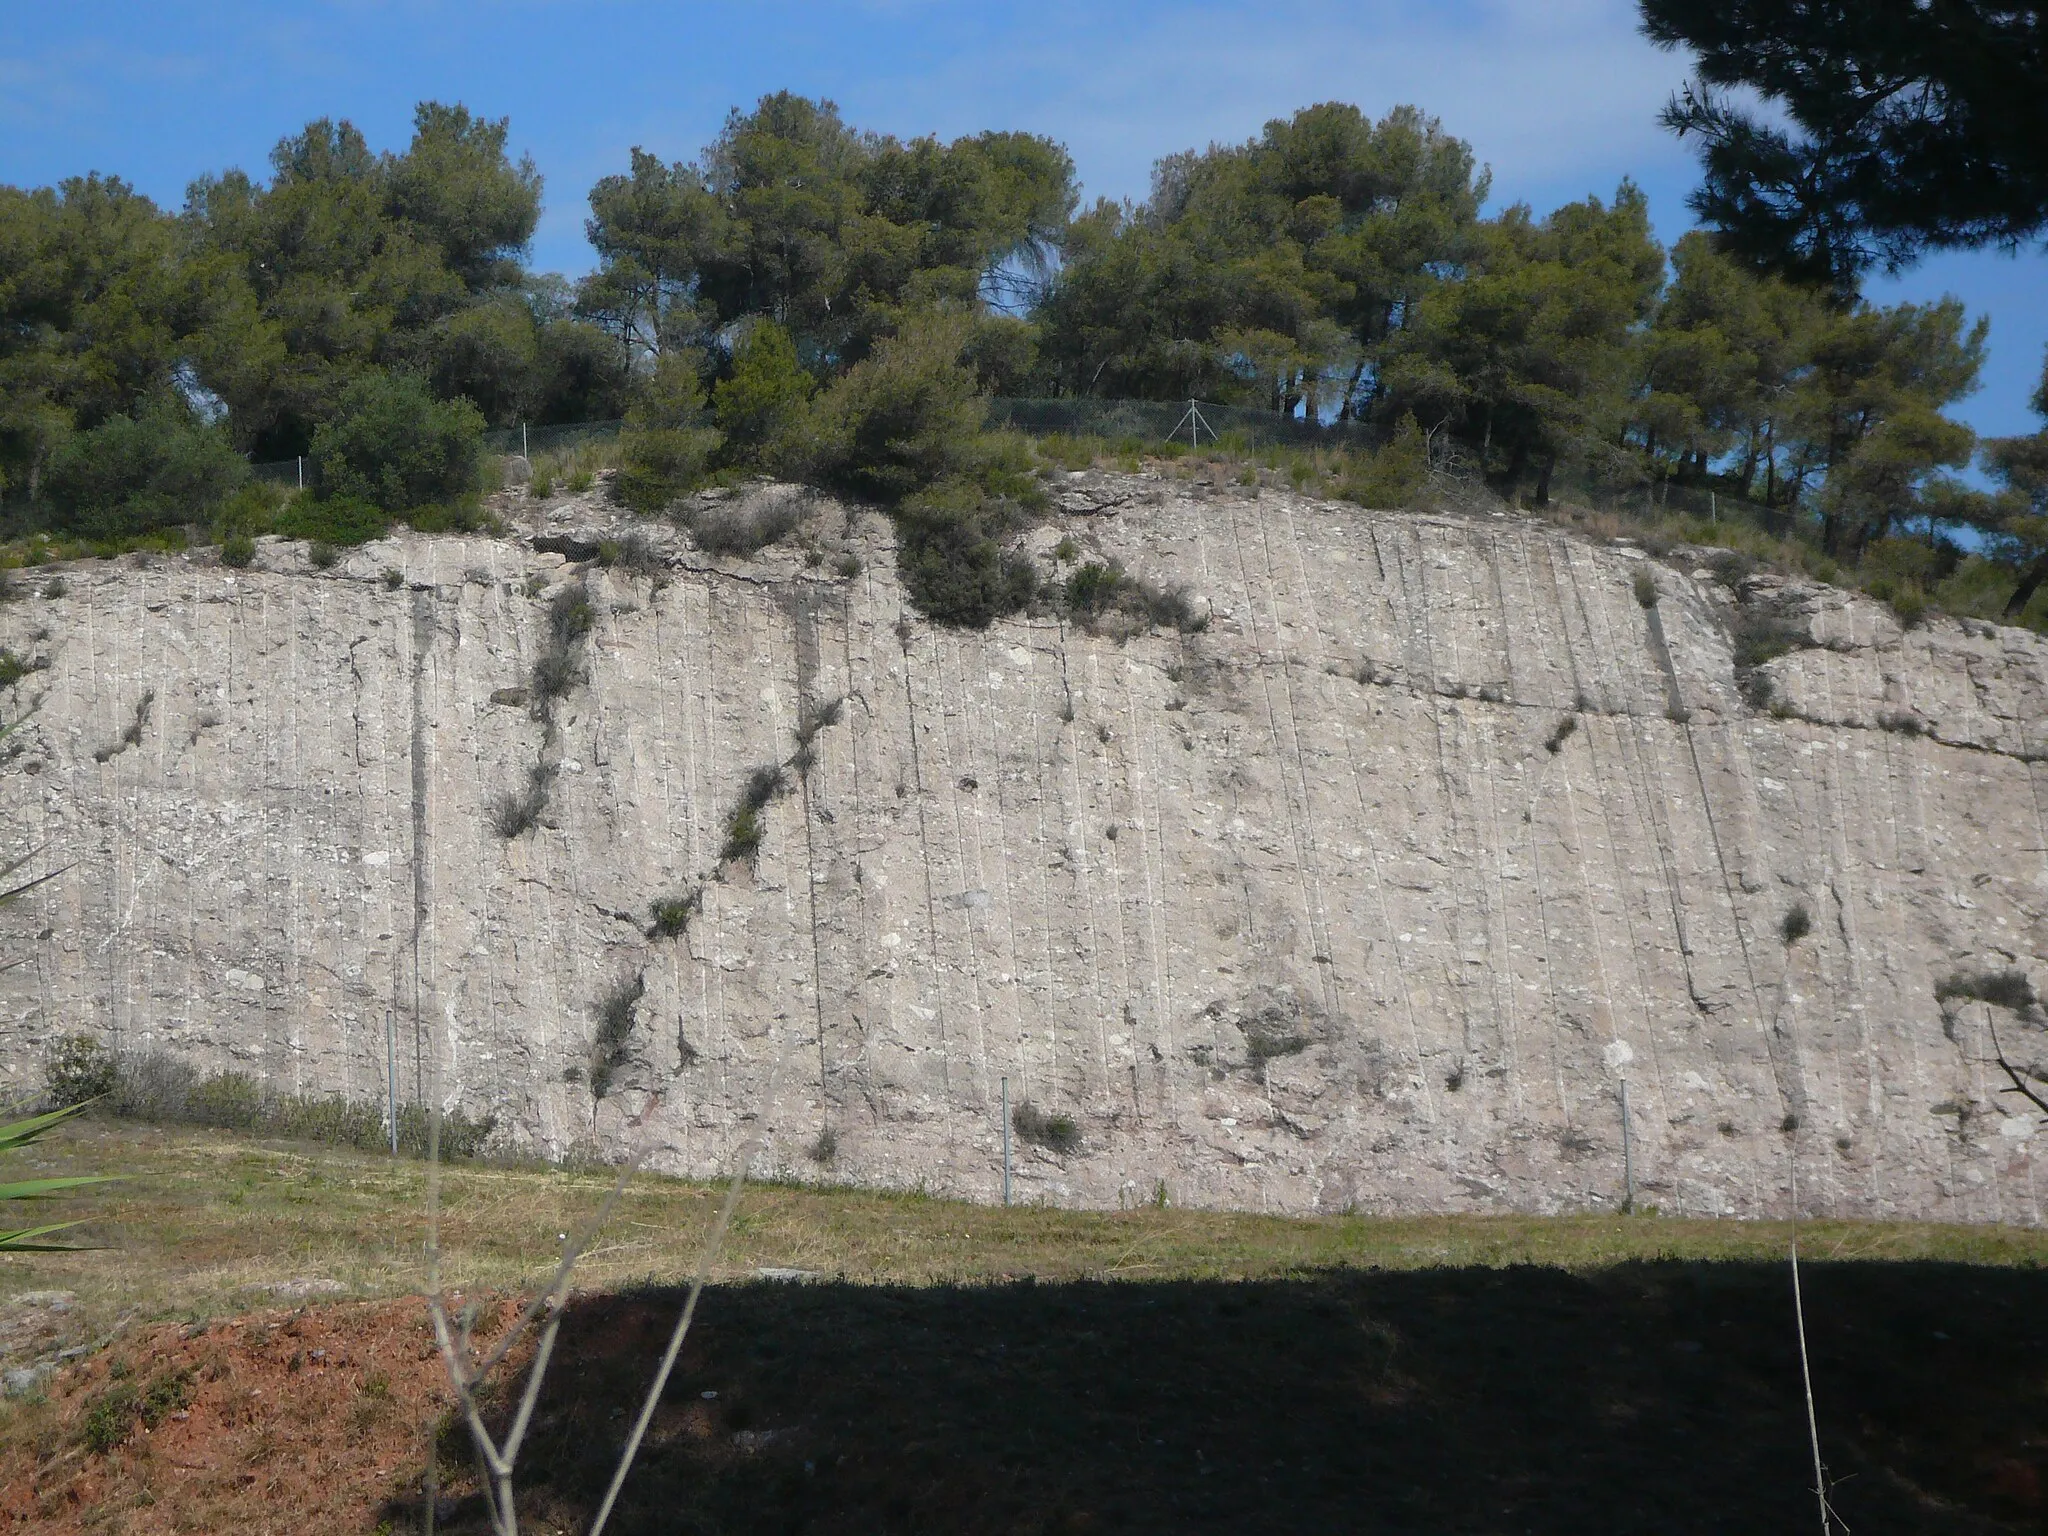 Photo showing: This is a a photo of a geologic site or geotope in Catalonia, Spain, with id: